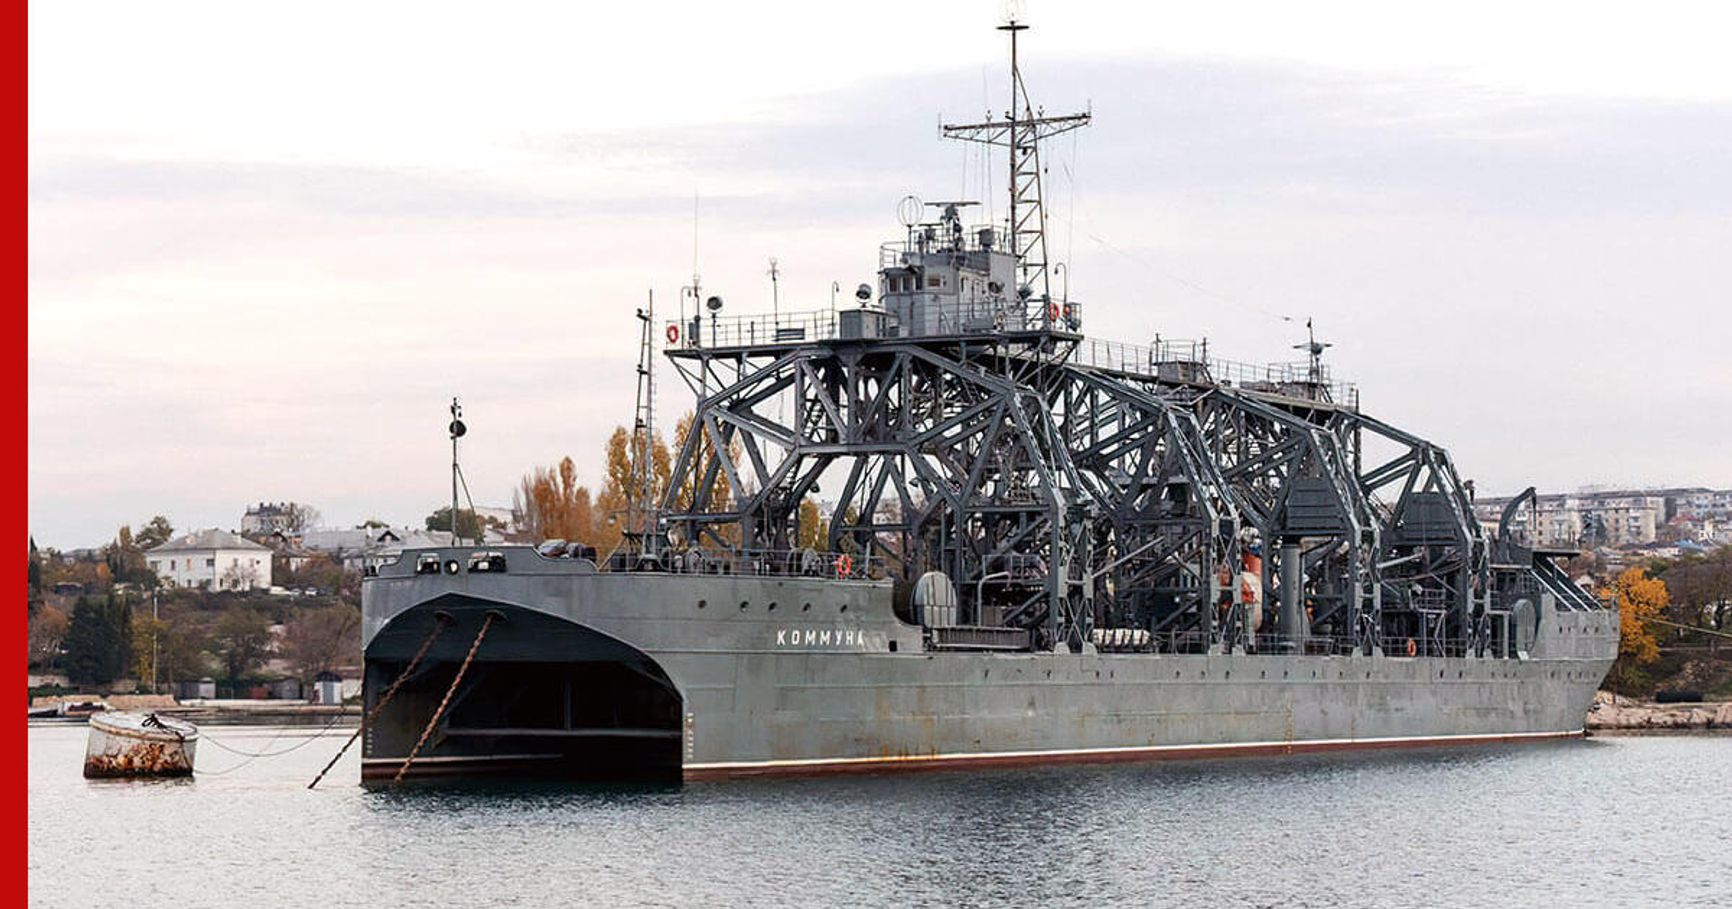 To rescue the Moskva, Russia had to deploy the Kommuna, a ship launched in 1915